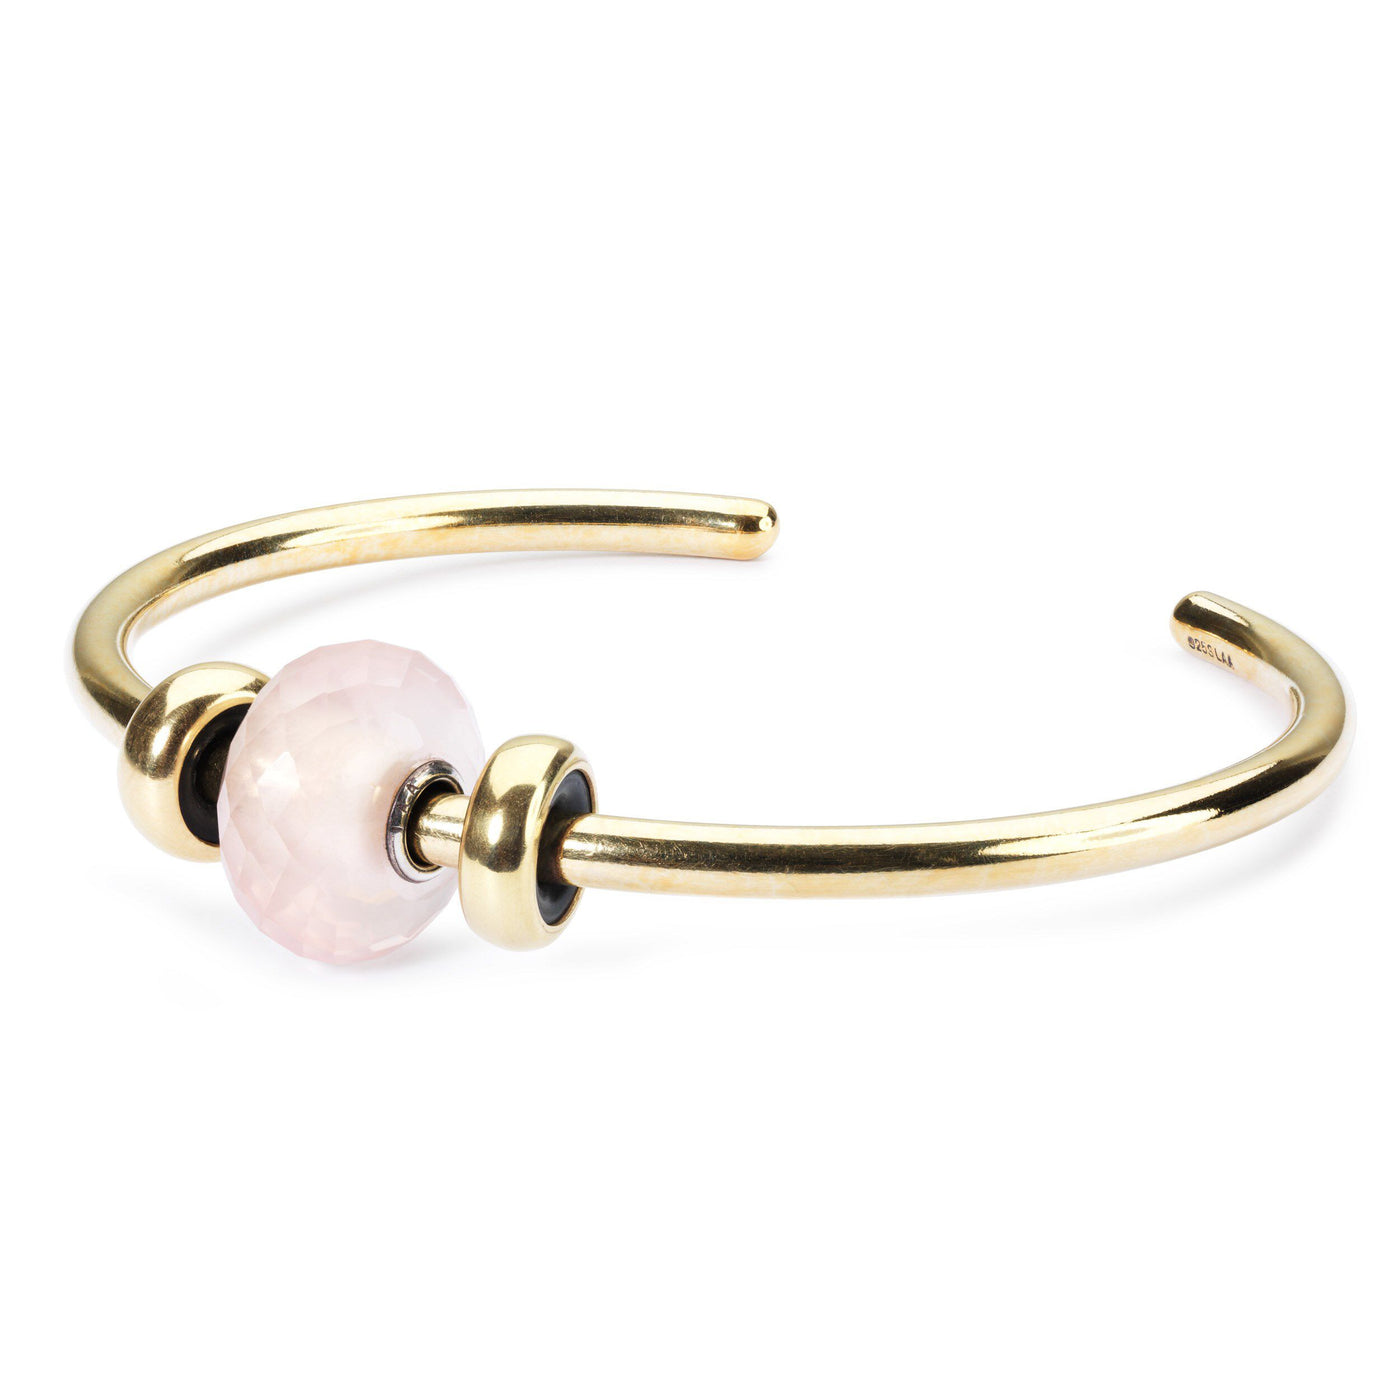 Gold Plated Bangle with 2 x Gold Spacers - Trollbeads Canada